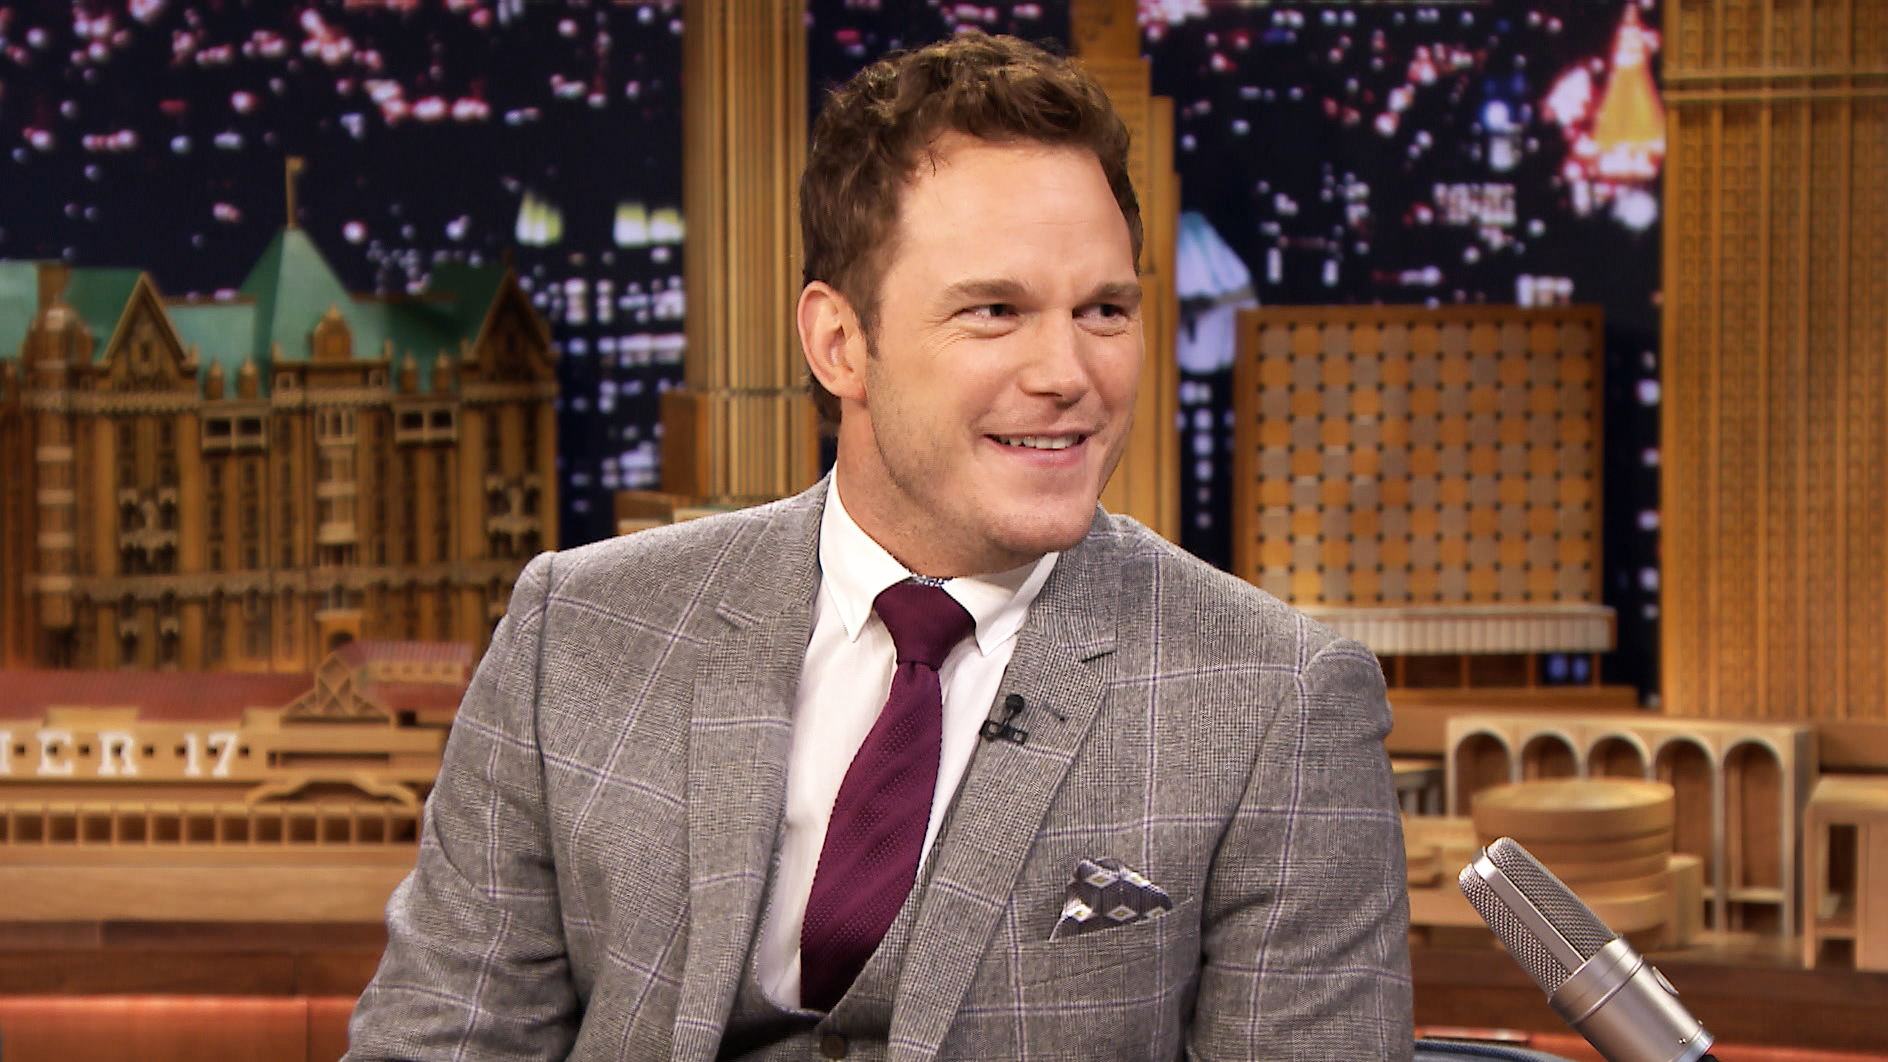 HD desktop wallpaper of Chris Pratt wearing a grey suit with a maroon tie, smiling during a TV show interview, with a cityscape background.